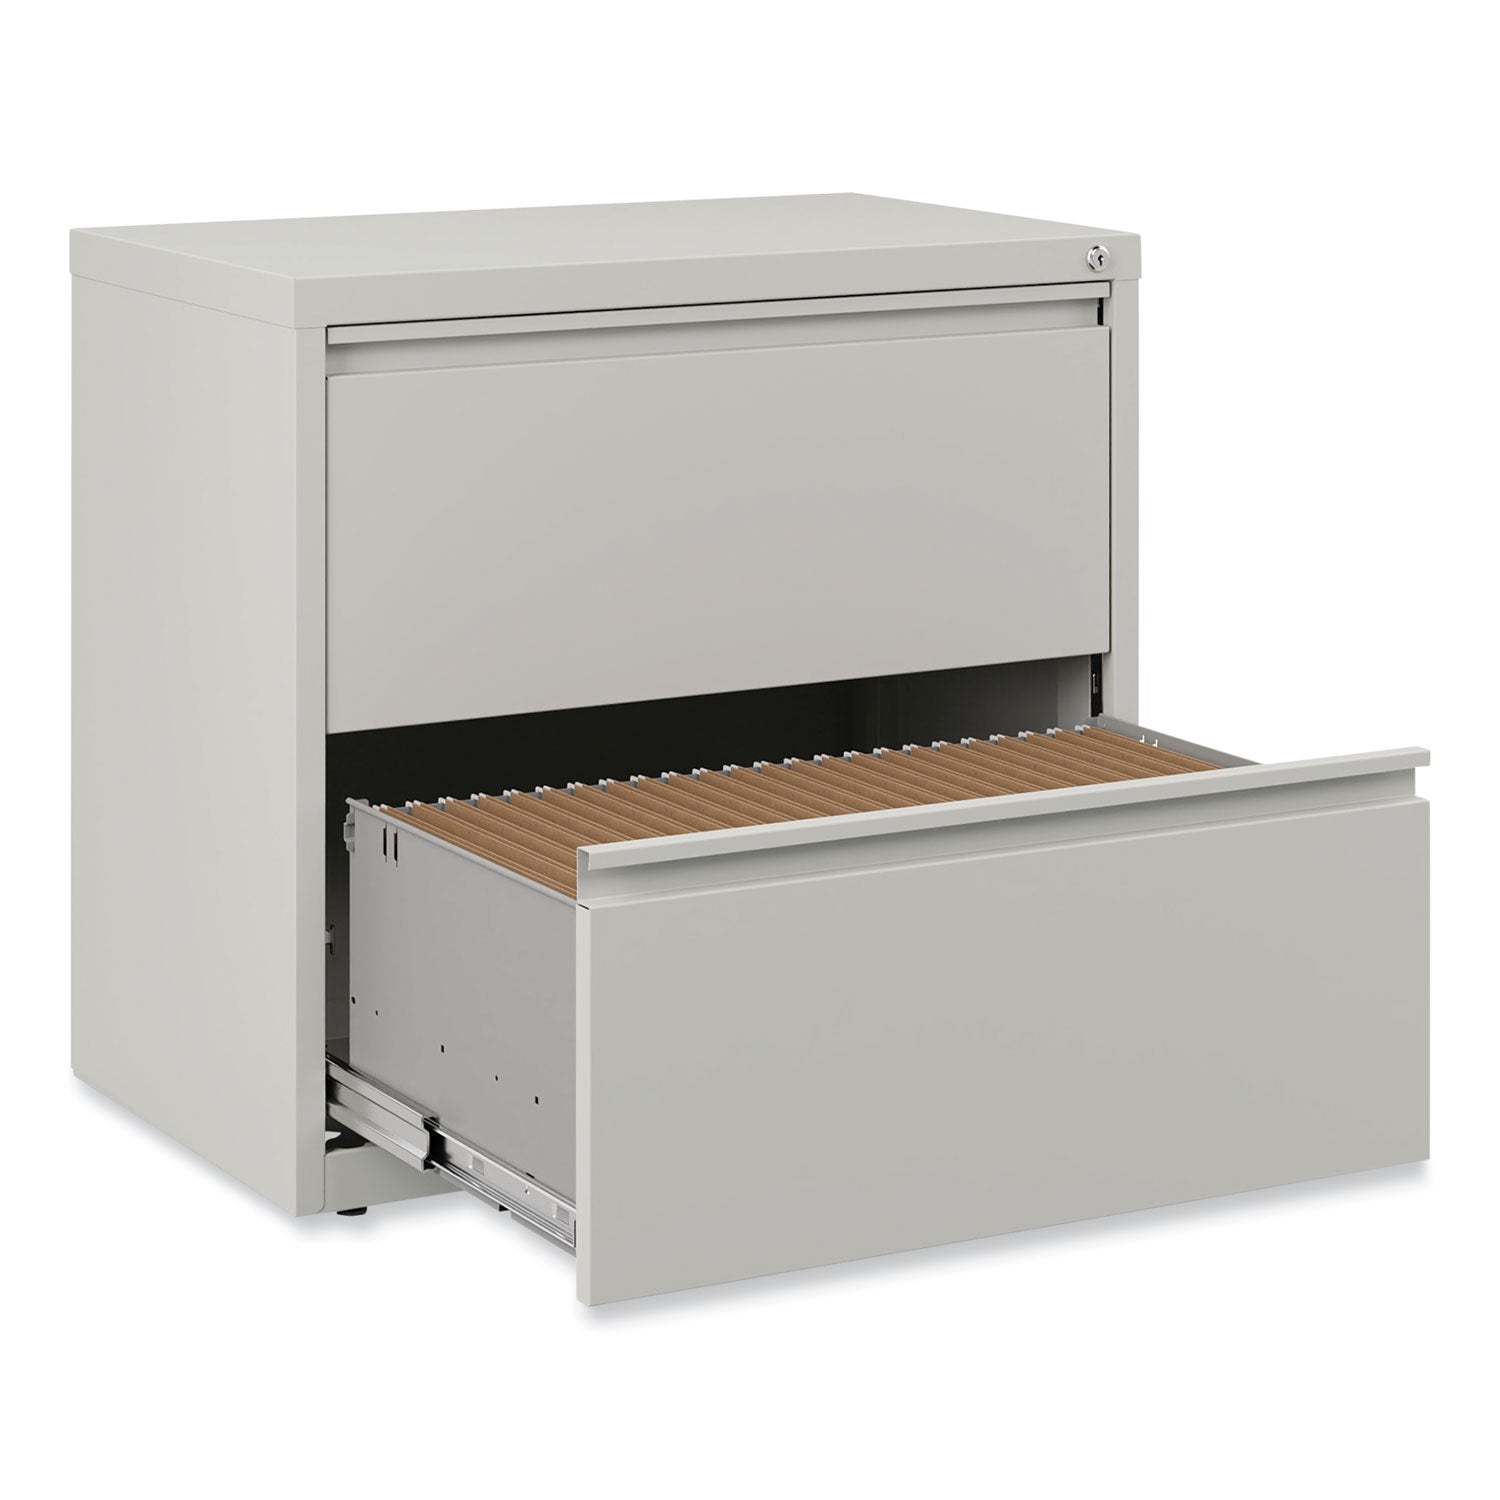 lateral-file-2-legal-letter-size-file-drawers-light-gray-36-x-1863-x-28_alehlf3029lg - 5